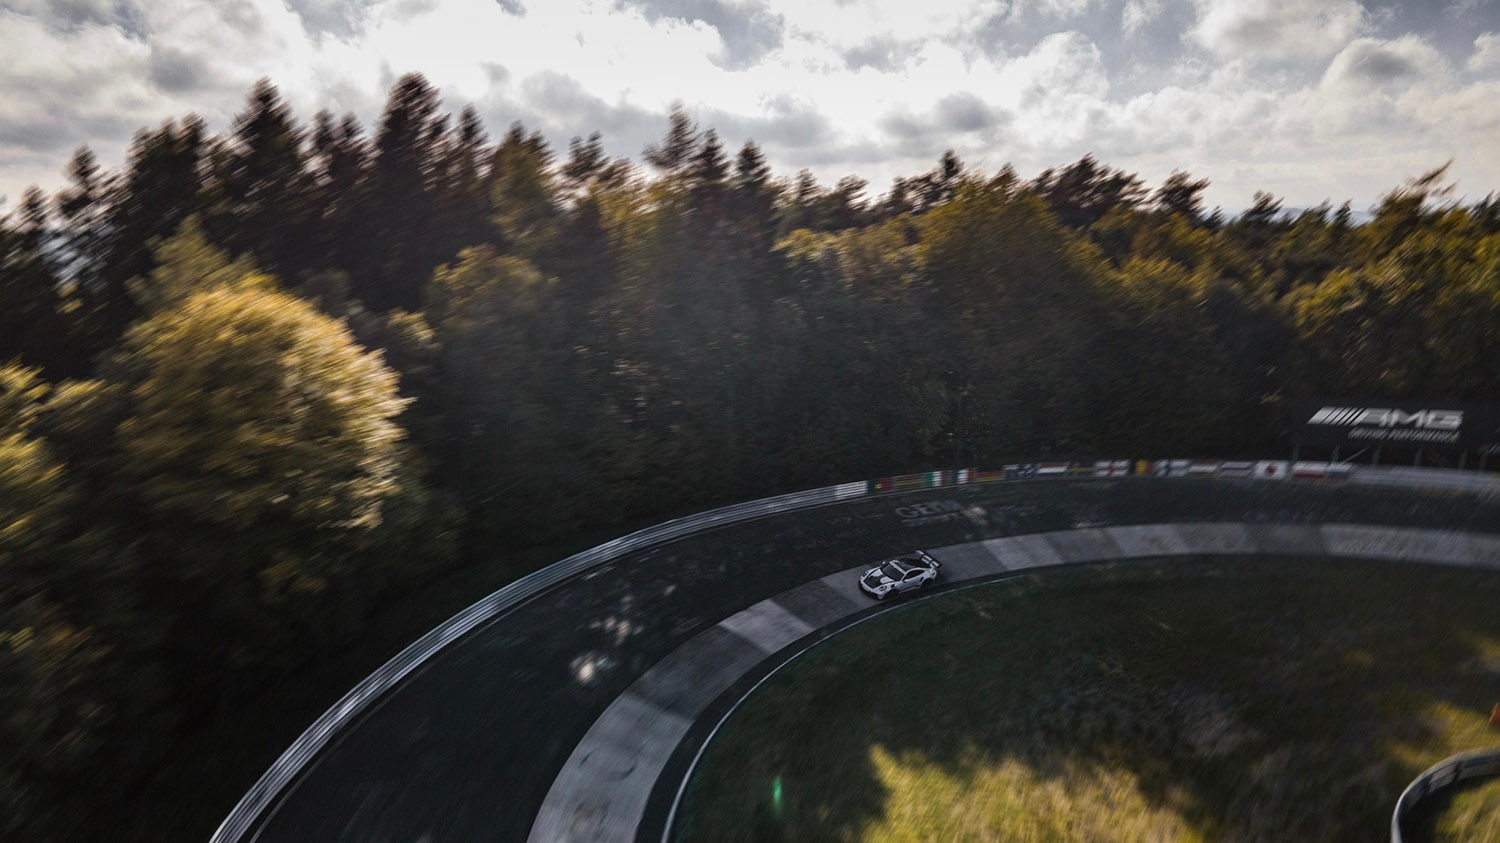 Bird's eye shot of a Porsche 911 GT3 RS driving on a curve of the Nundefinedrburgring